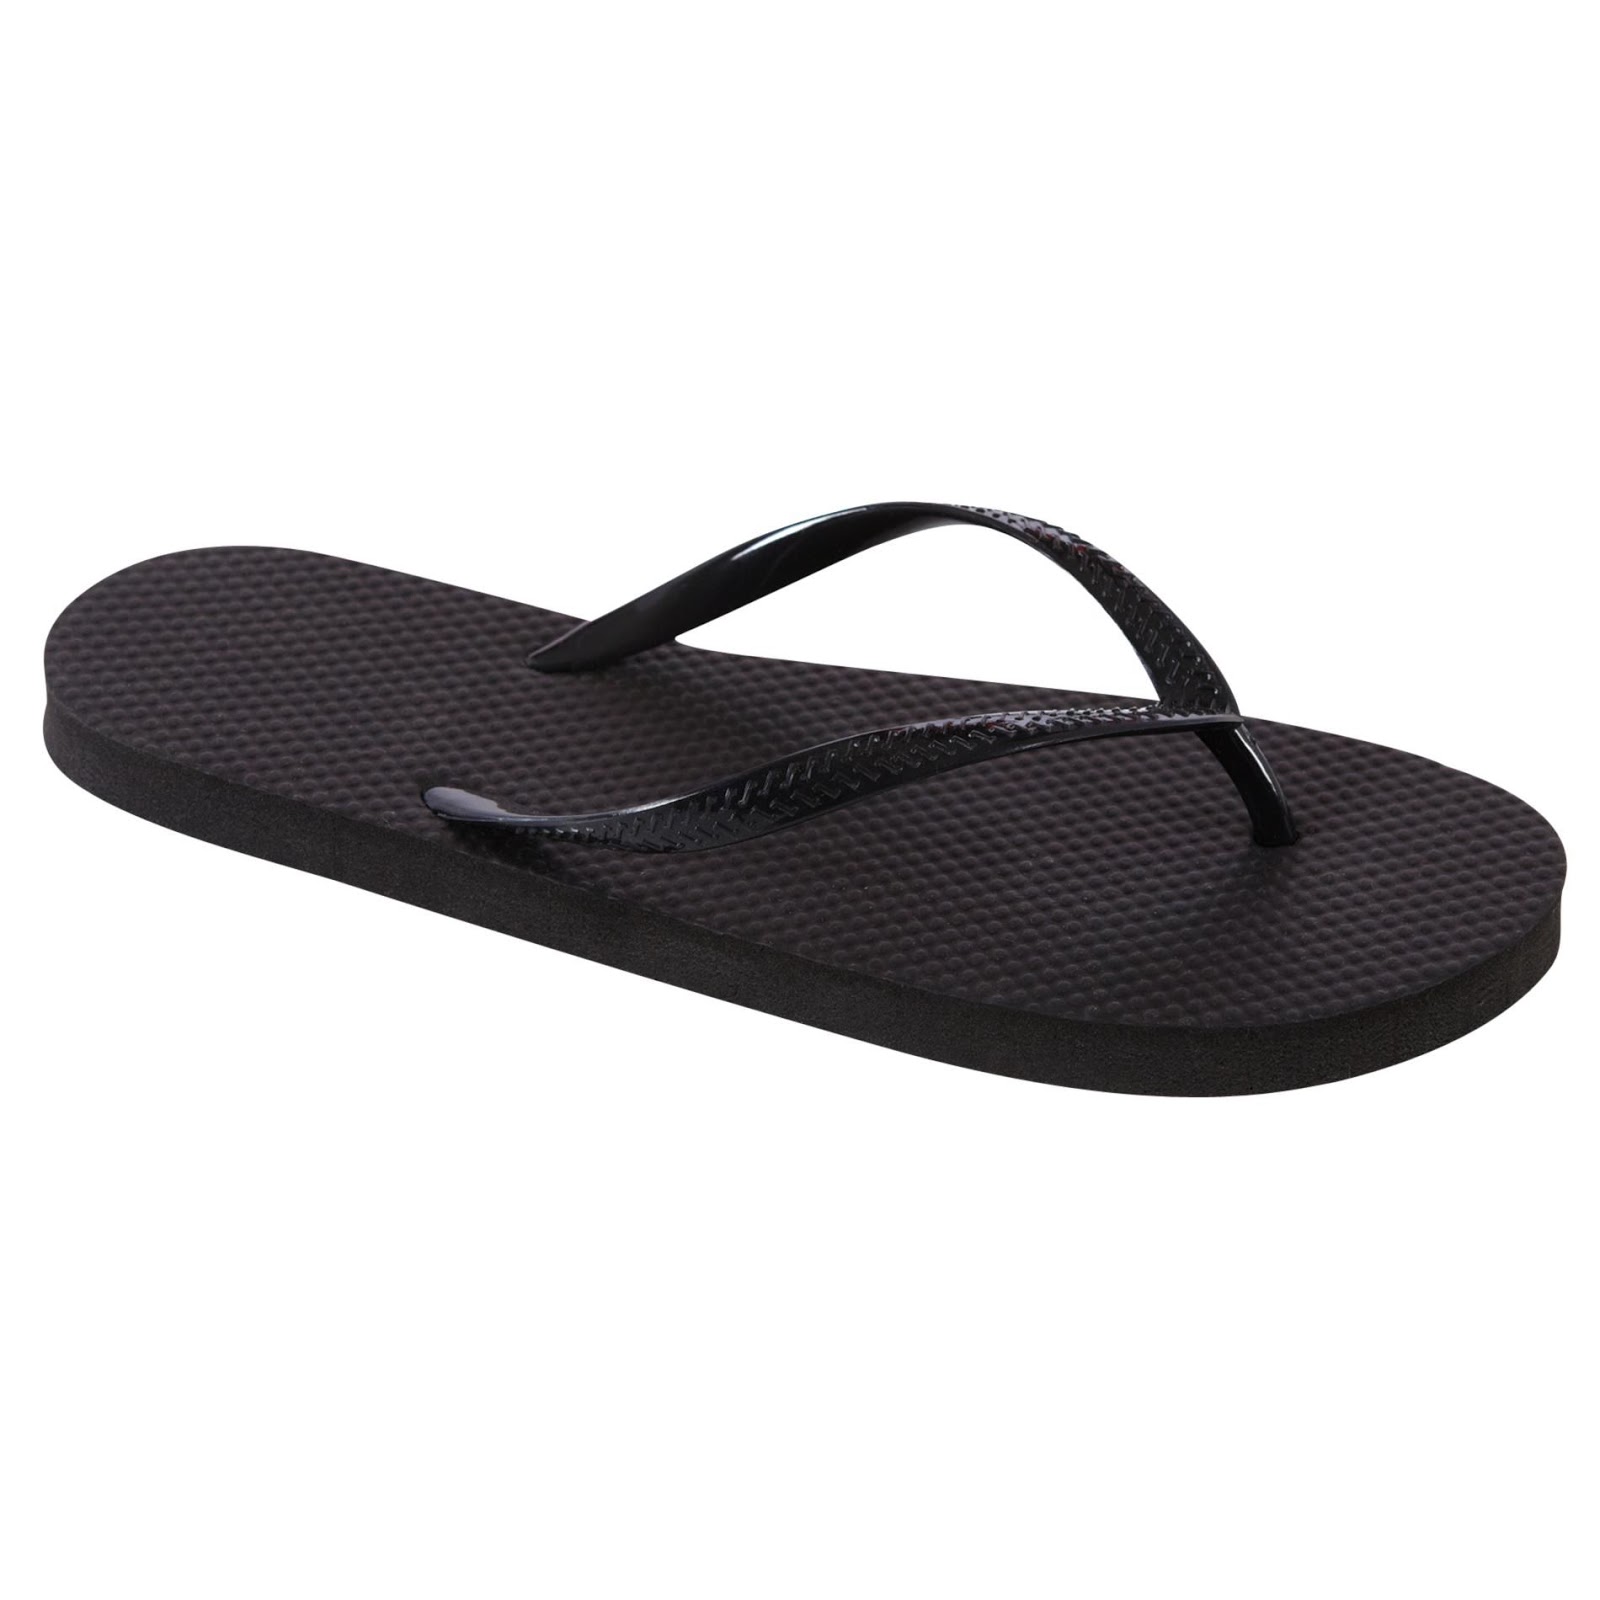 Flip Flop Sale (Mens, Womens, Girls or Boys) $0.79 + Free Store Pick Up ...